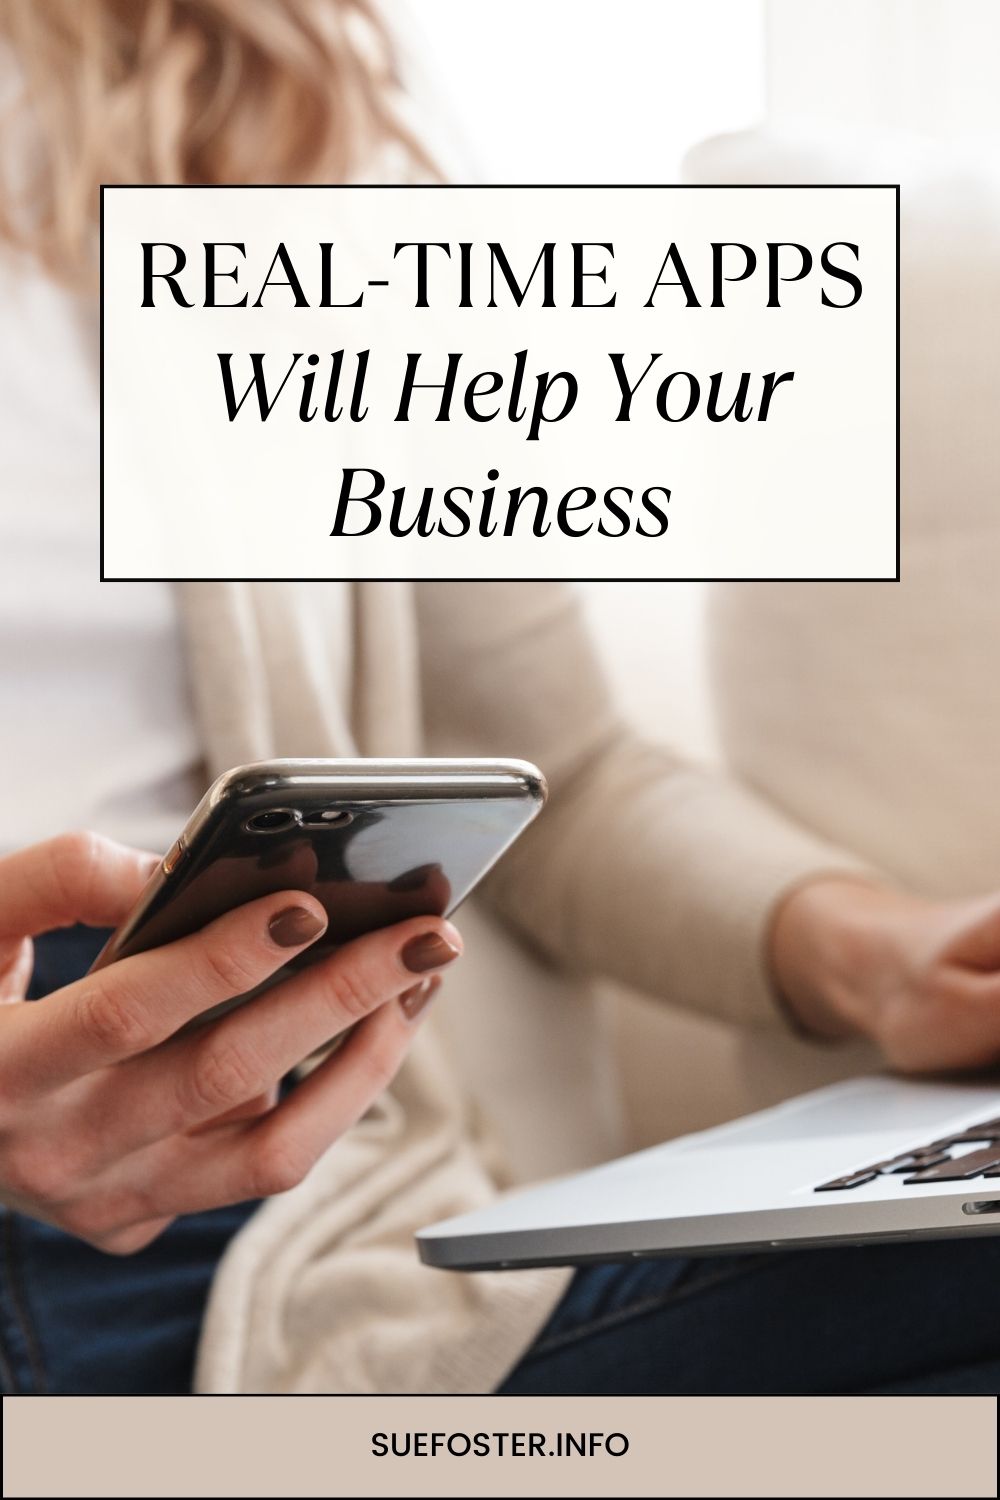 Streamline job scheduling, provide instant quotes, manage projects, improve time management, and increase sales with real-time apps for your business.